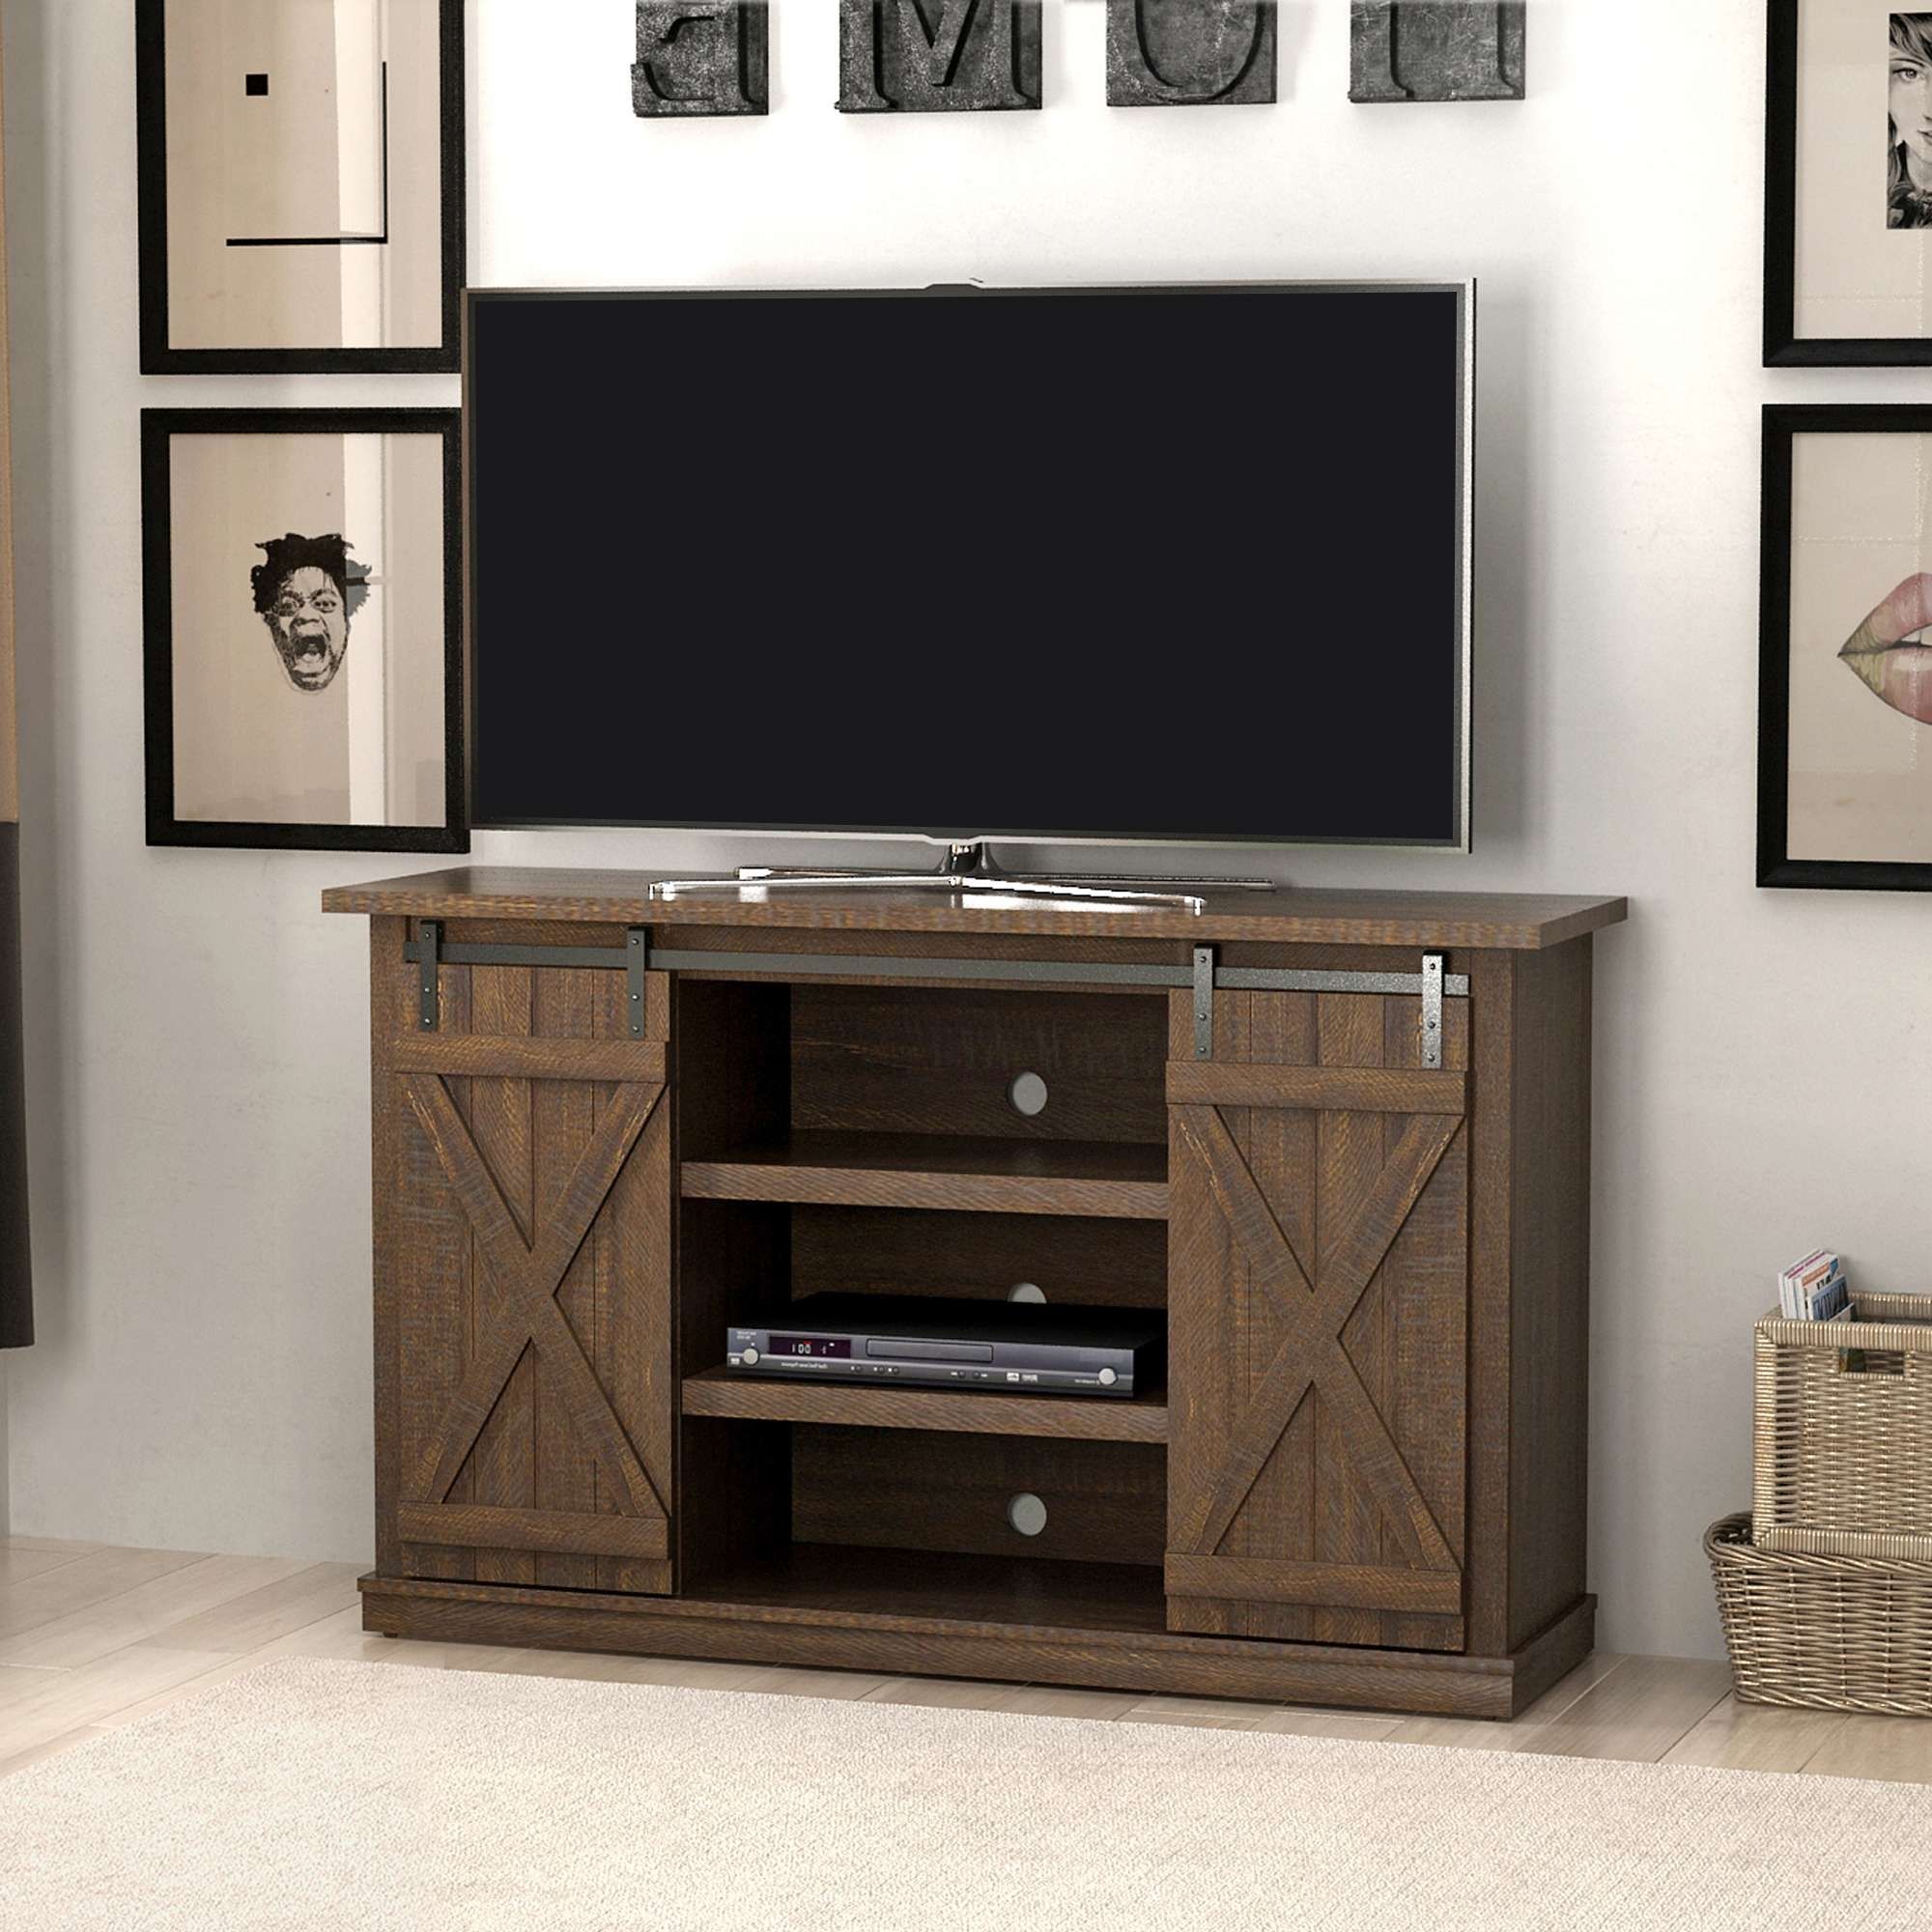 Tv Stands – Walmart With Maple Tv Stands For Flat Screens (Gallery 1 of 15)